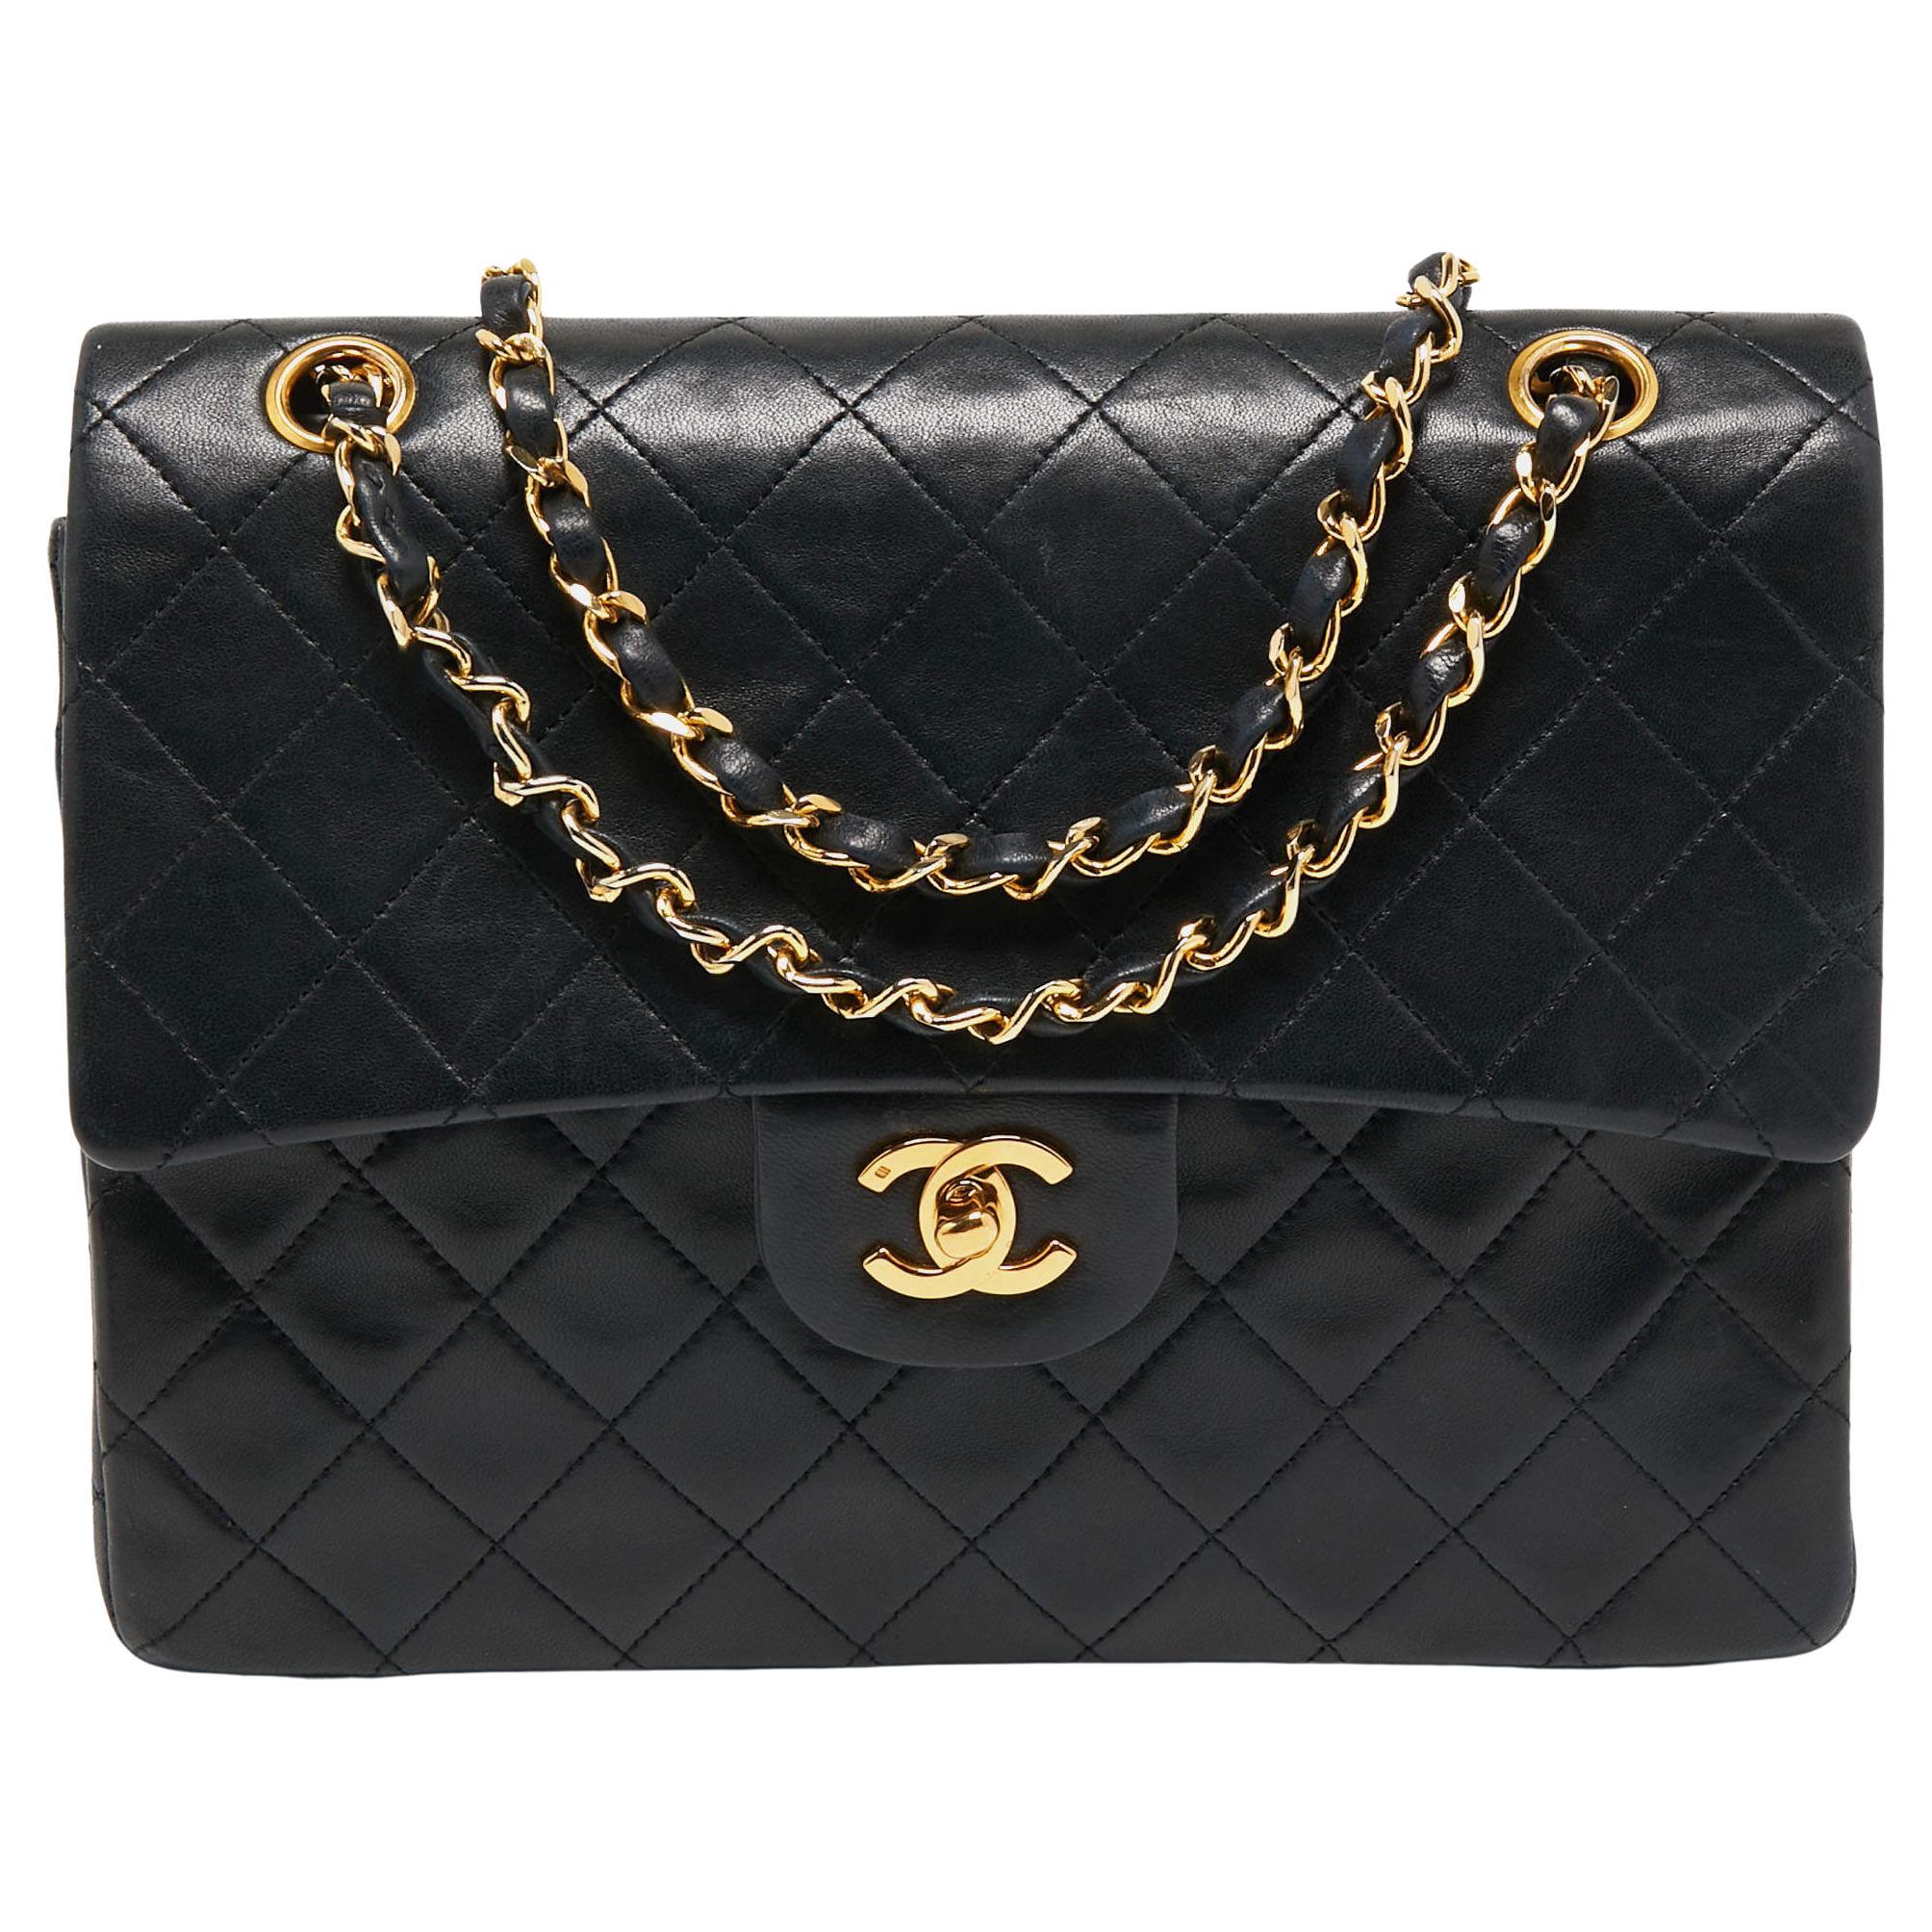 Chanel Black Quilted Leather Classic Double Flap Bag